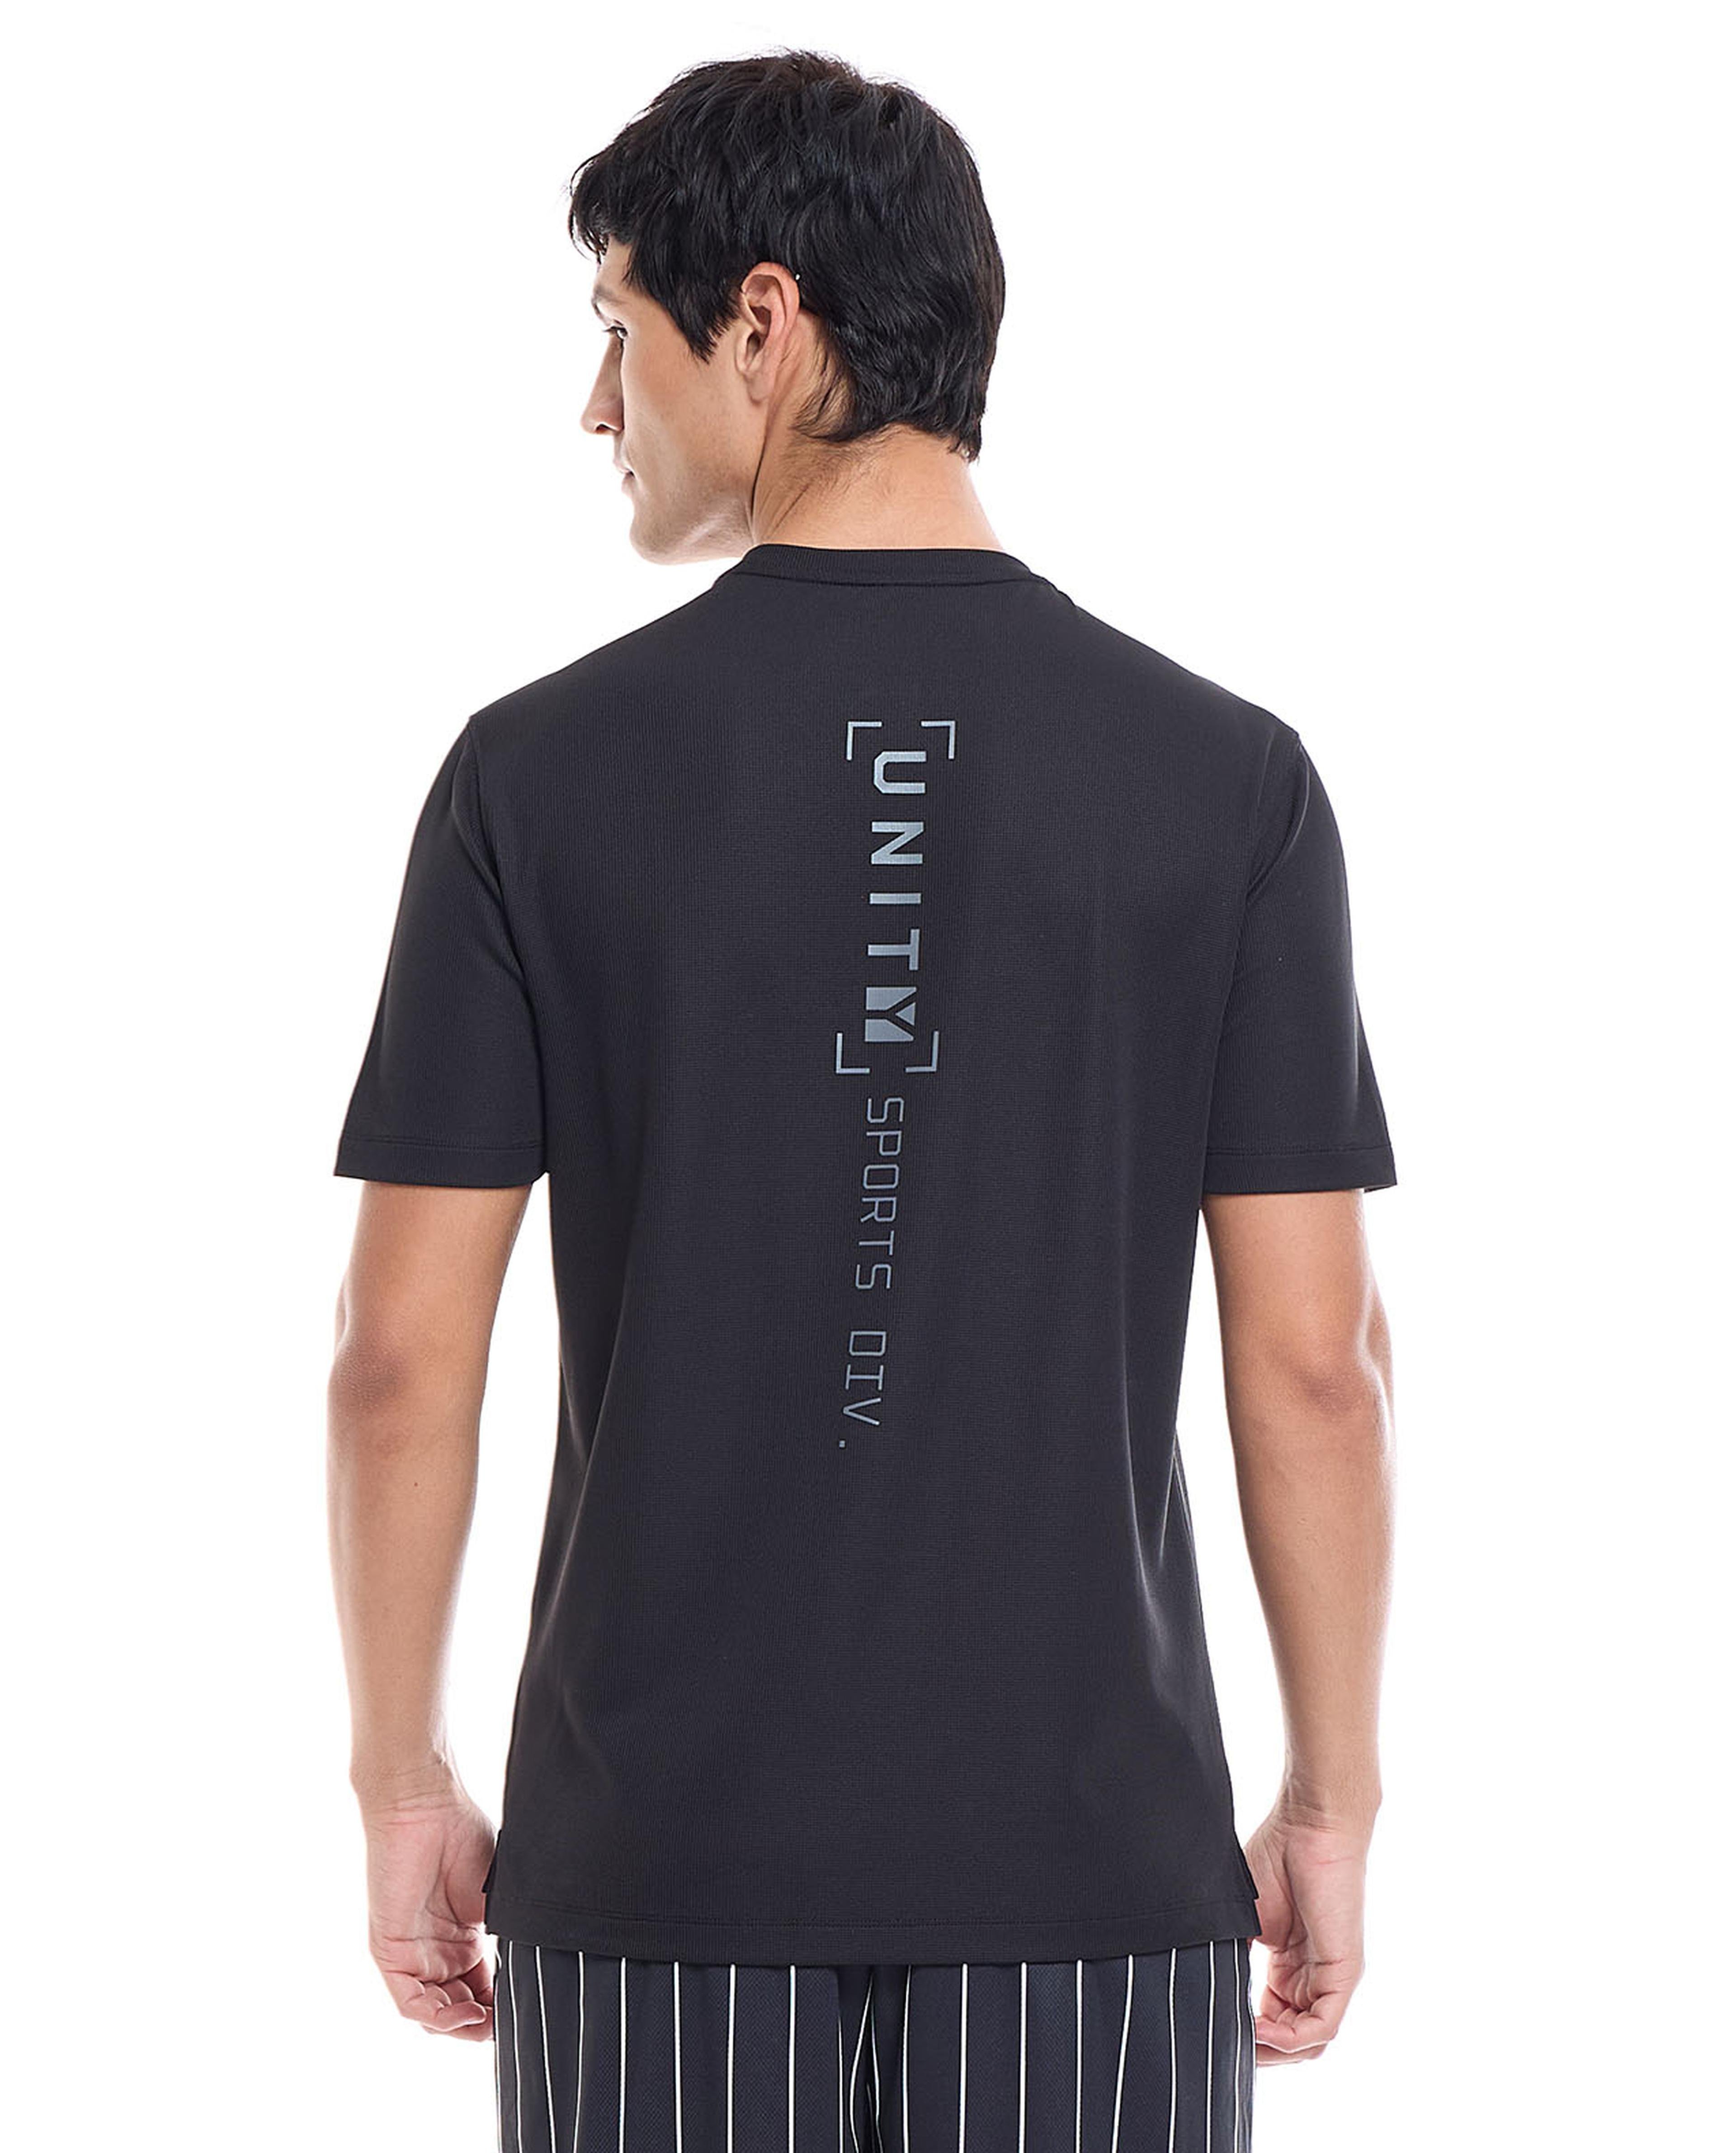 Printed Active T-Shirt with Crew Neck and Short Sleeves